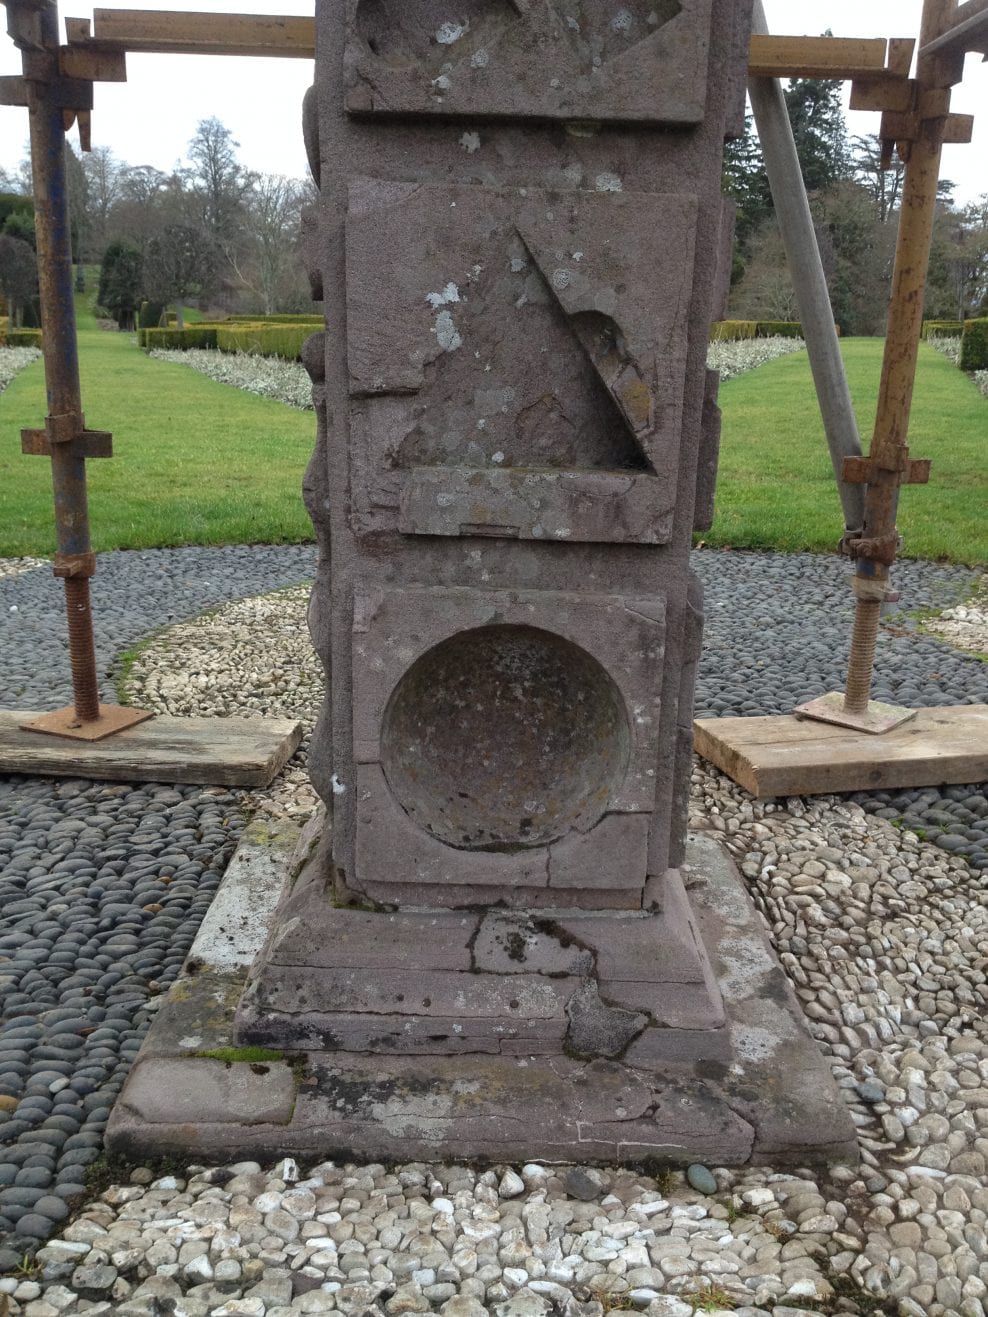 Drummond Castle Sundial structural degerioration issues at the base, during dismantling 2017